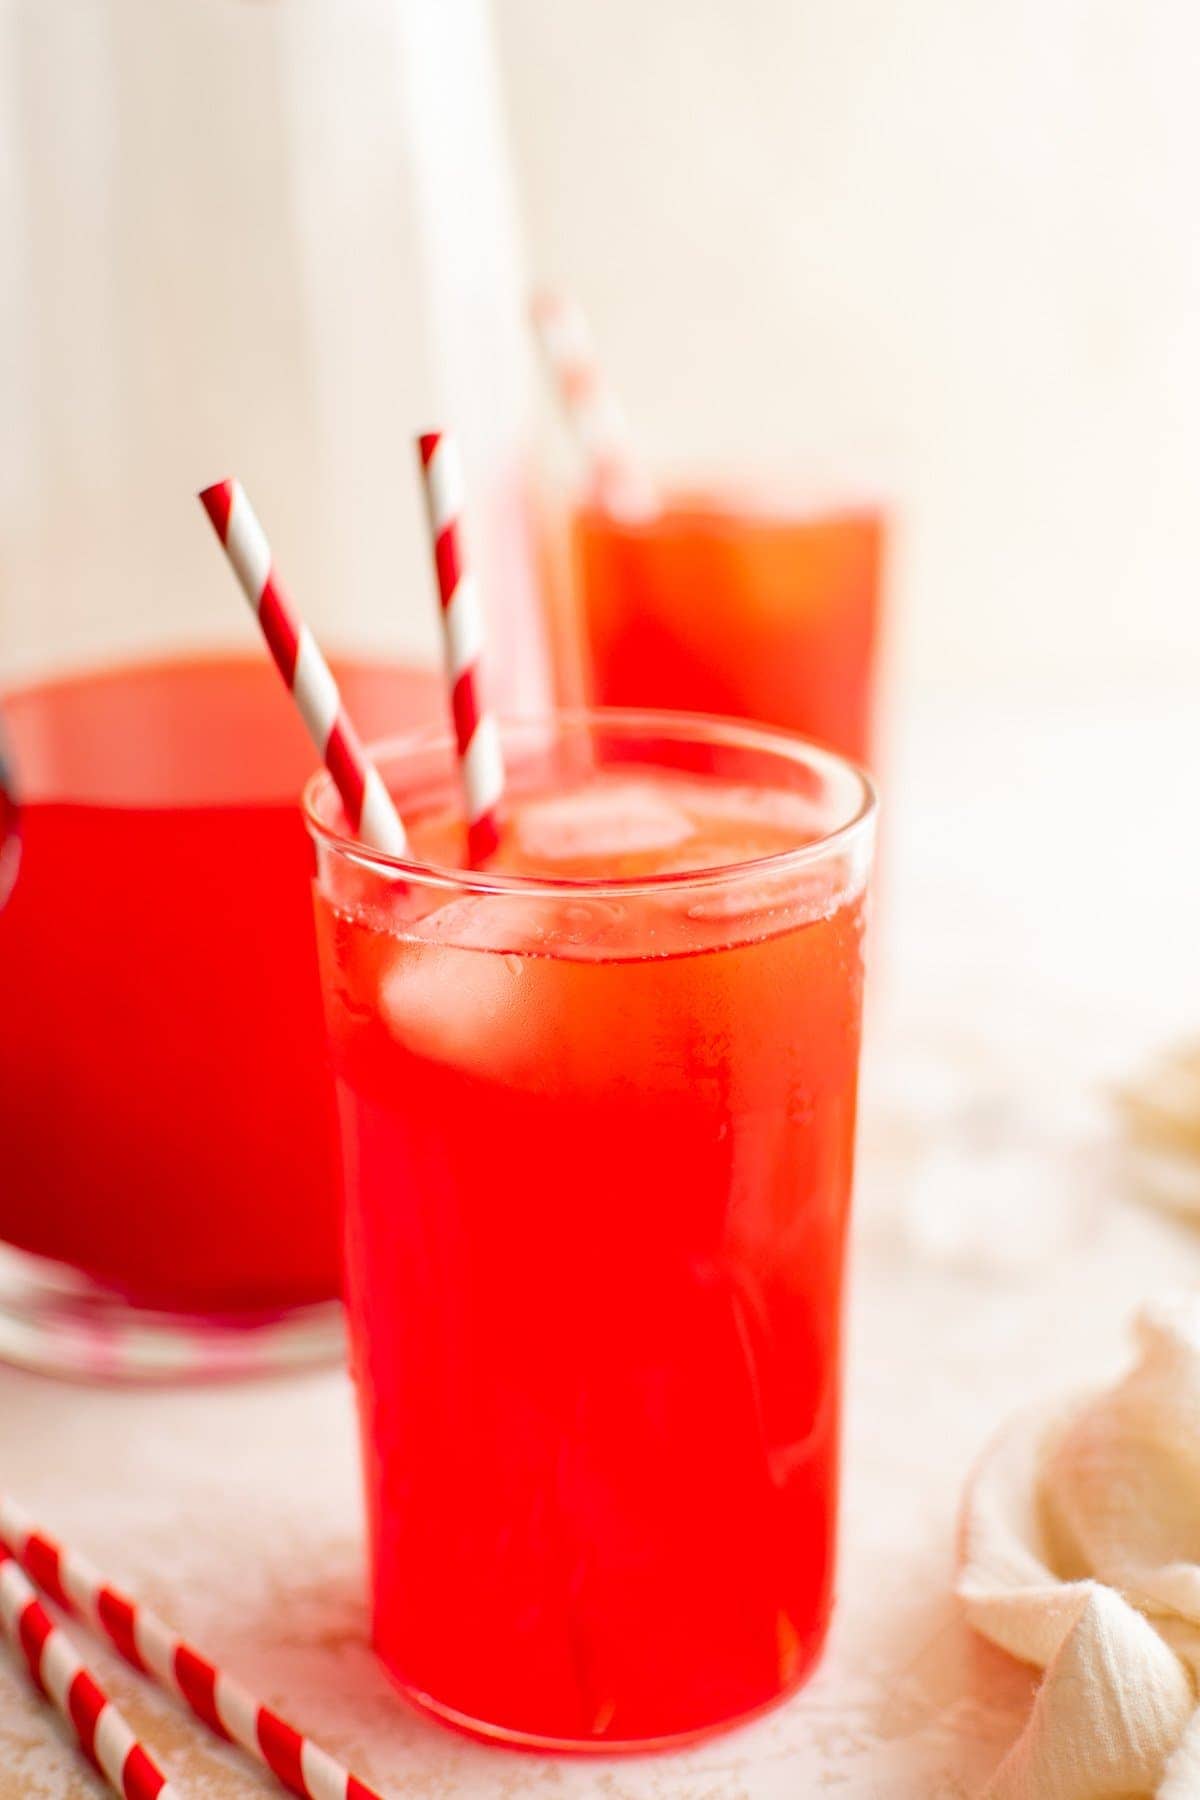 Red Punch in glasses with red and white striped straws.